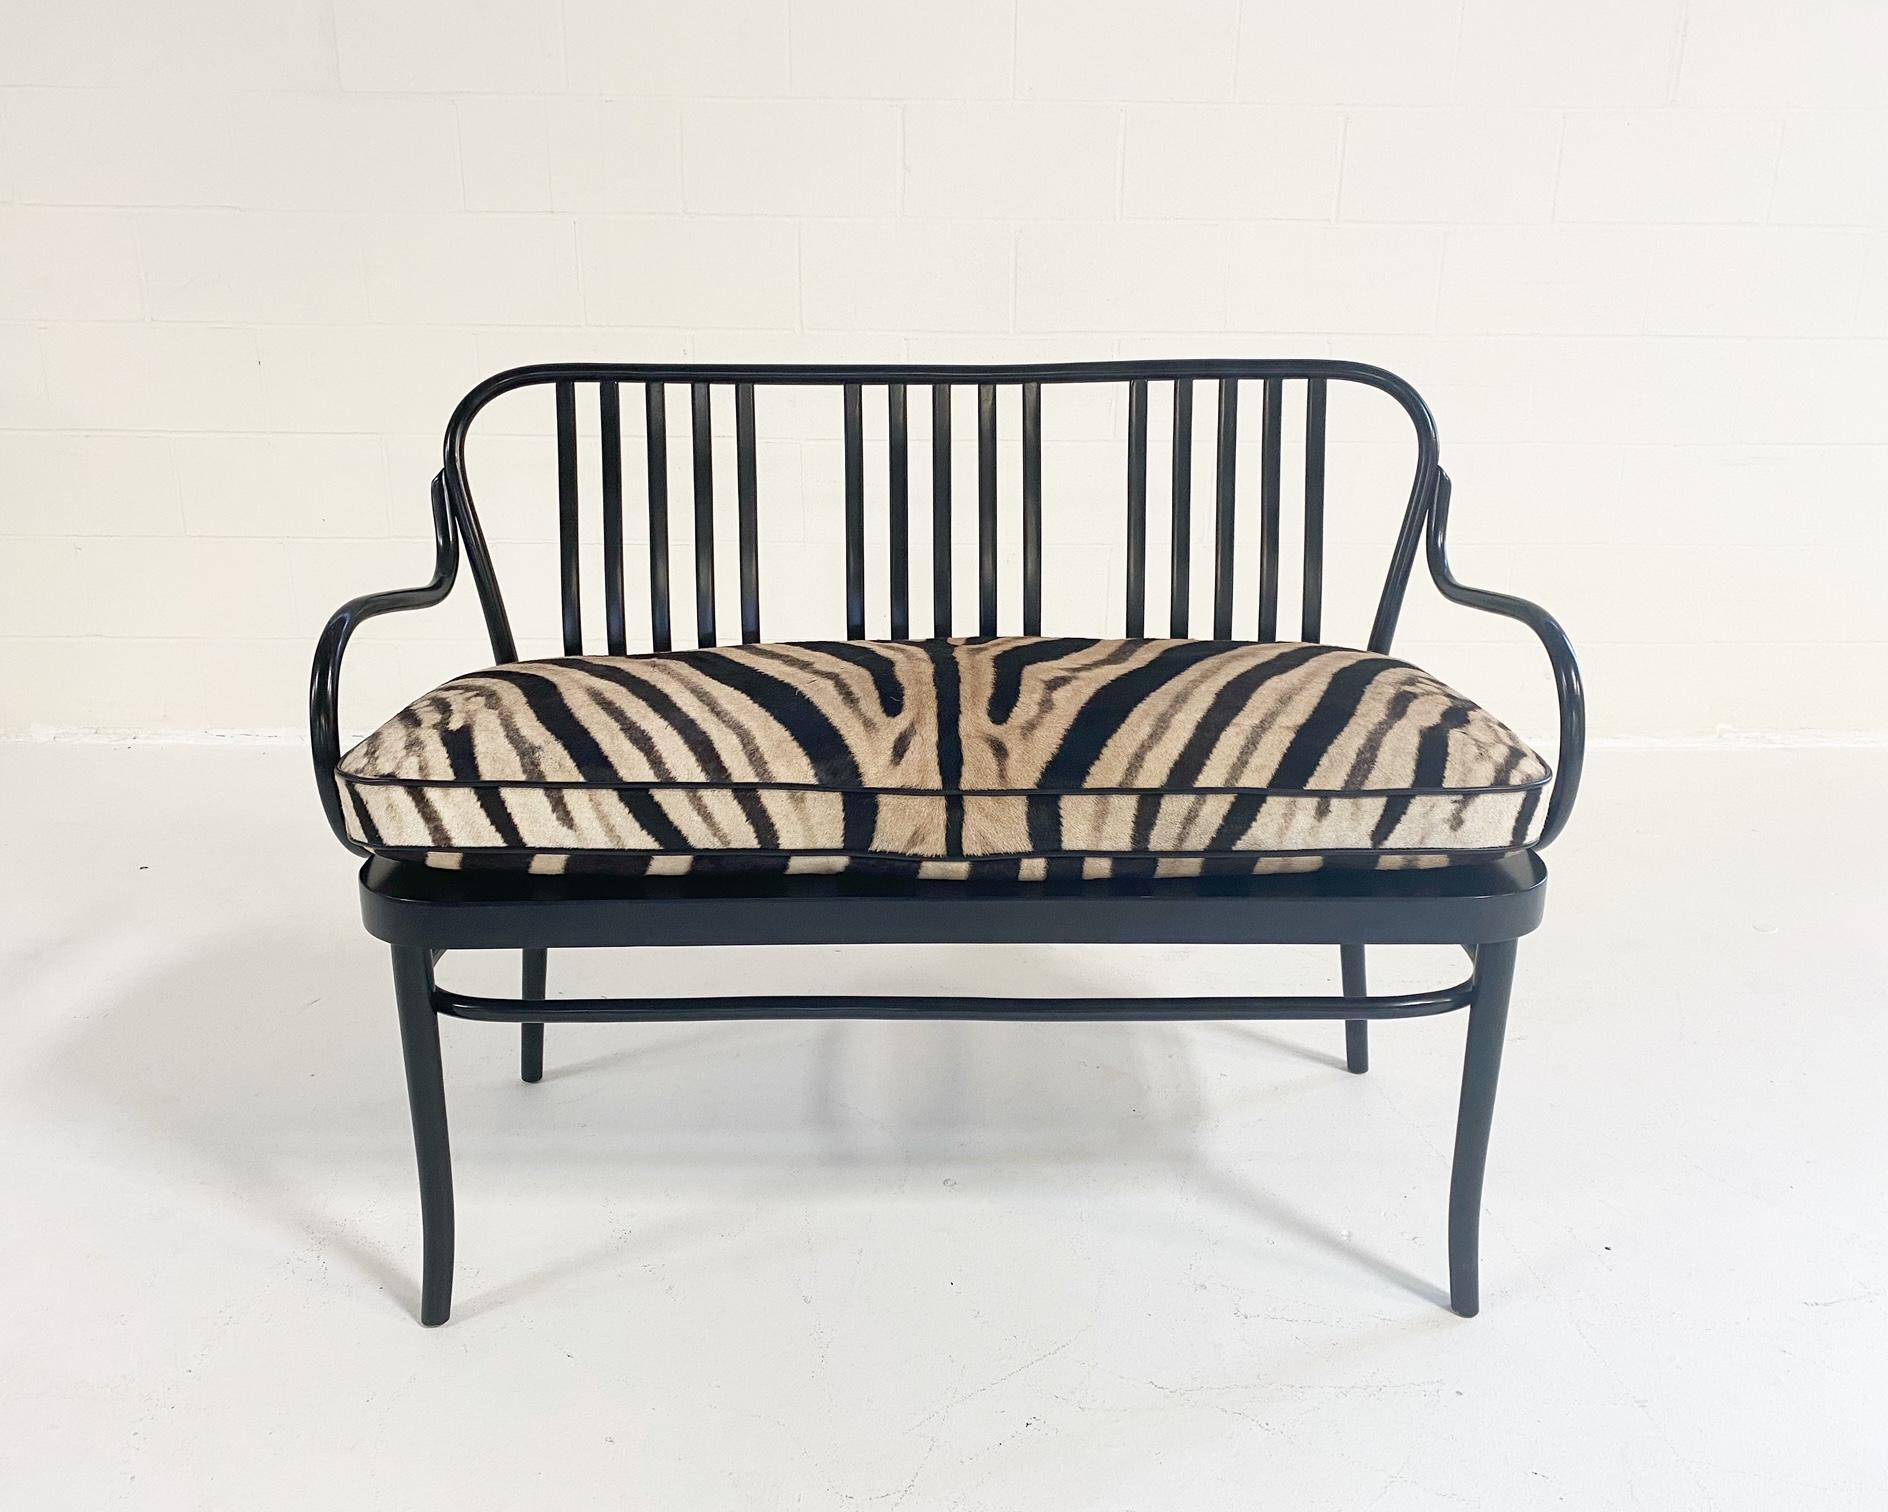 Wow factor! A Classic Thonet frame with an elevated luxury look. The slick, bentwood, black-lacquered frame is the perfect base for a custom, feather-filled zebra hide cushion. The cushion is finished with a cool black leather welt and ties. Beauty